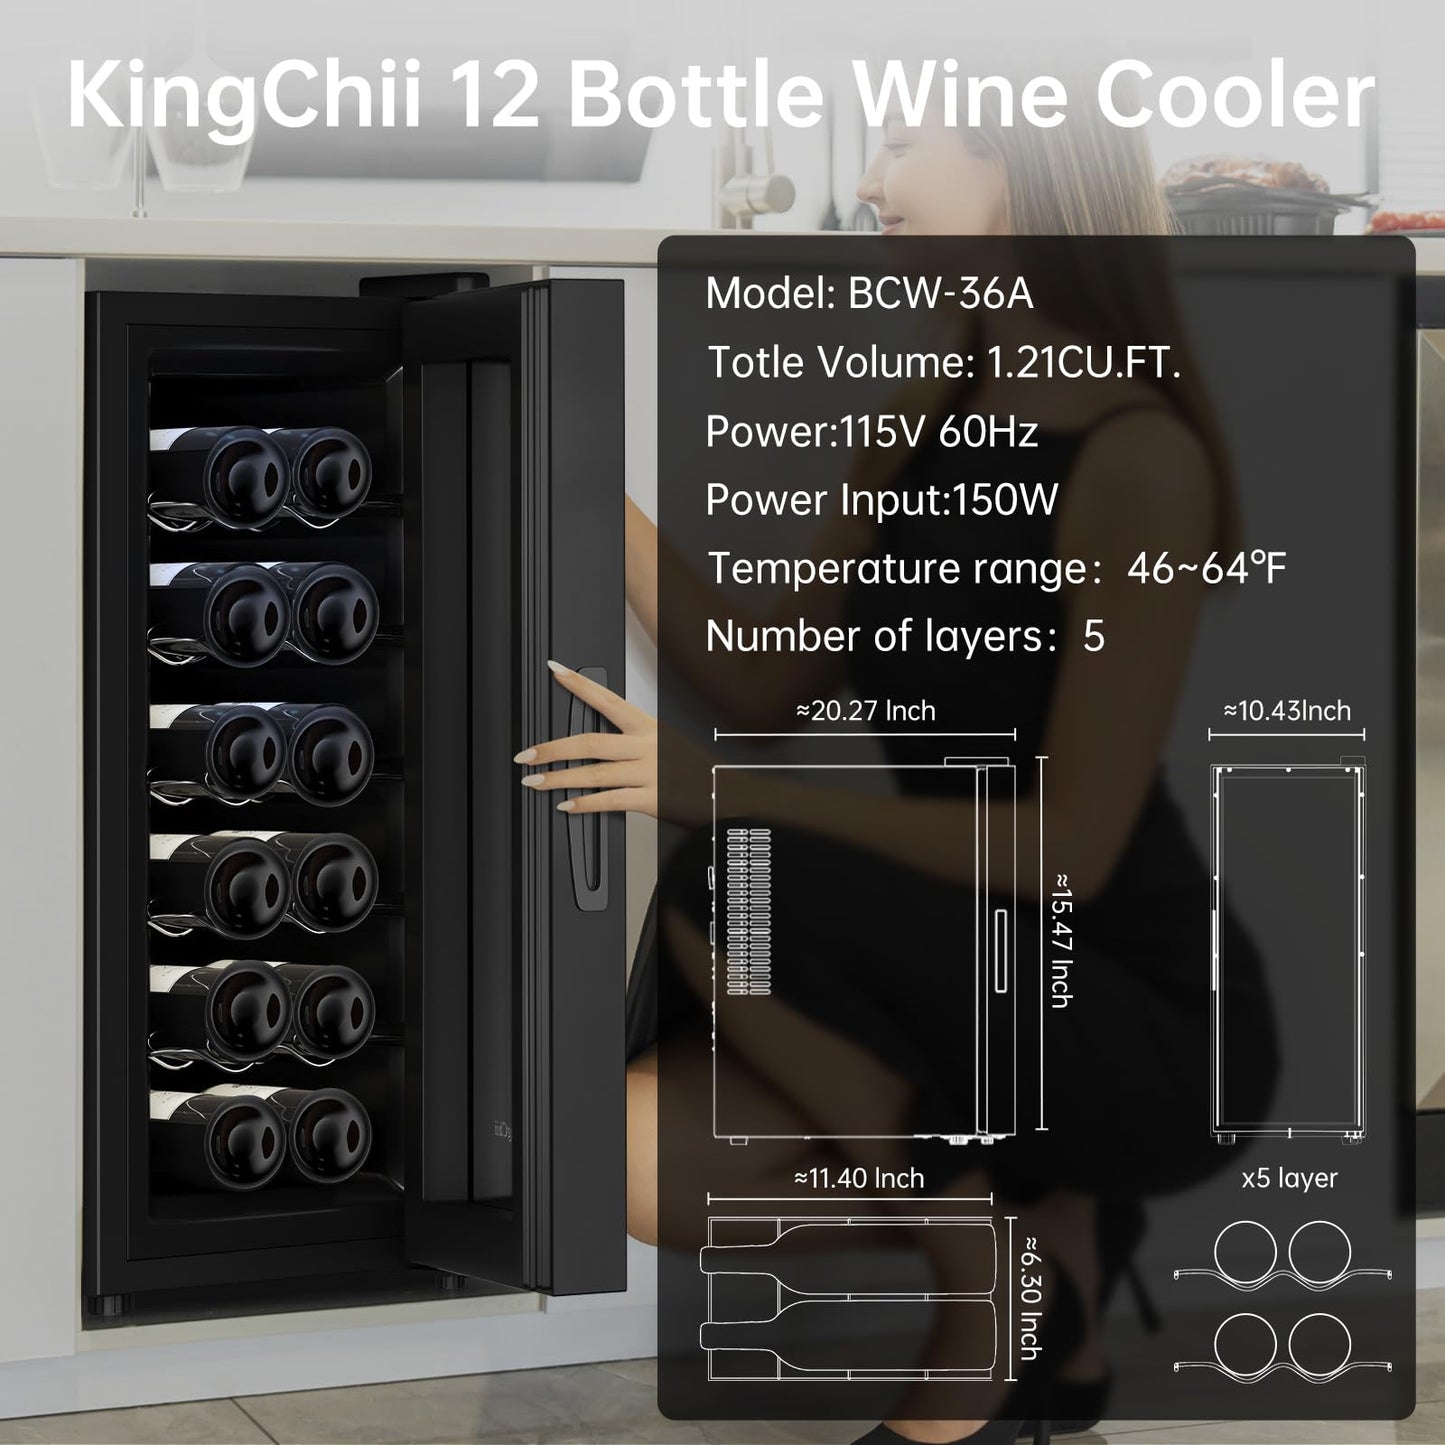 KingChii 12 Bottle Thermoelectric Wine Cooler Refrigerator Advanced Cooling Technology, Stainless Steel & Tempered Glass For Red Wine, Champagne for Home, Kitchen, or Office